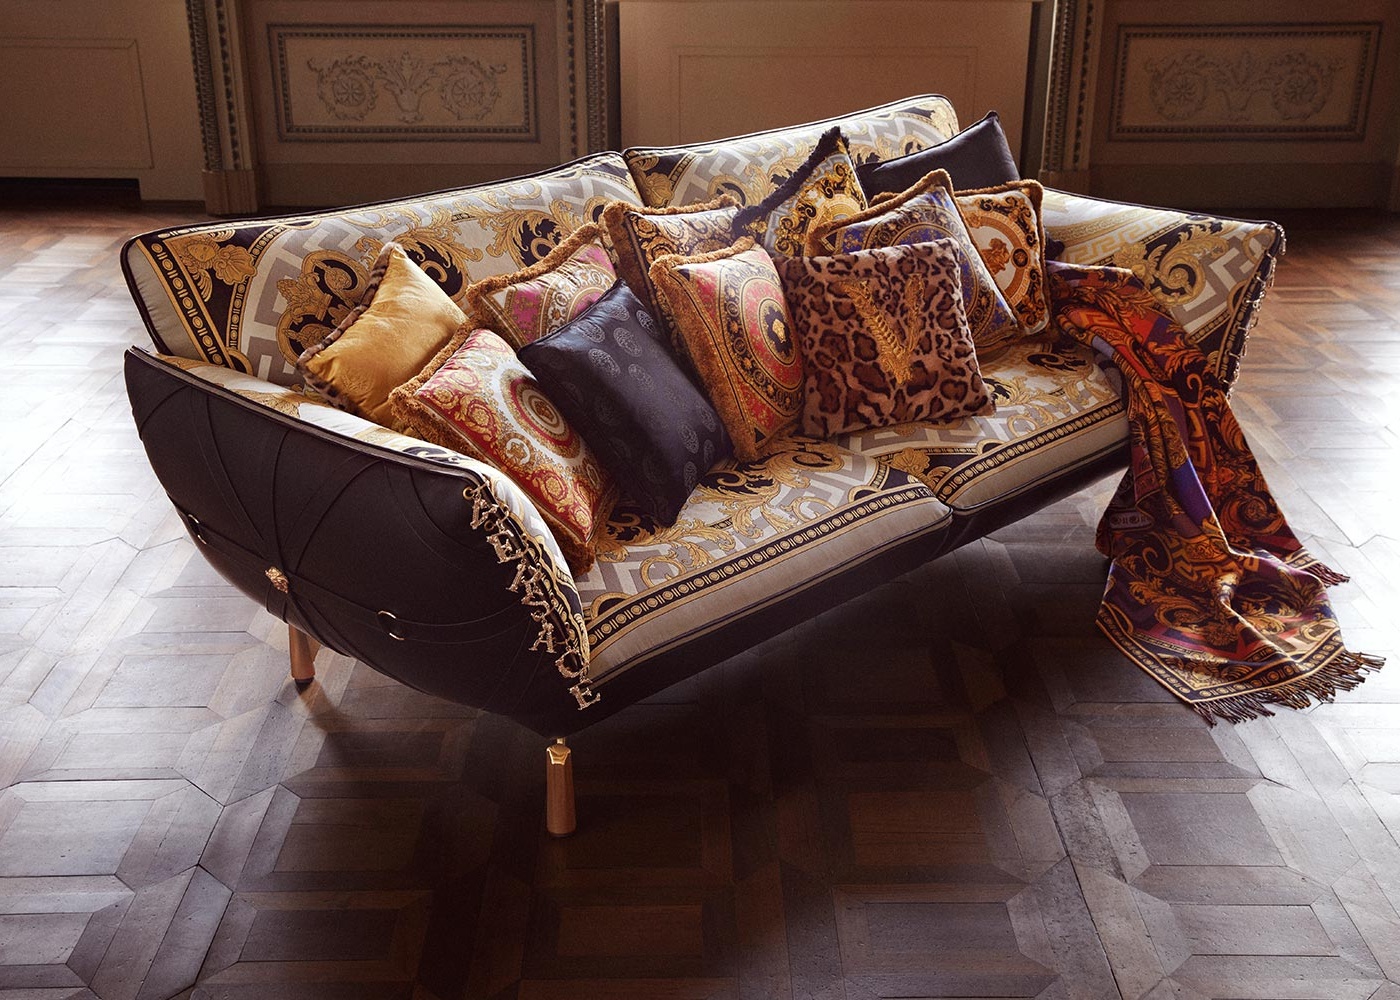 Versace Home Collection Personifies Glamour And Luxury High Net Worth